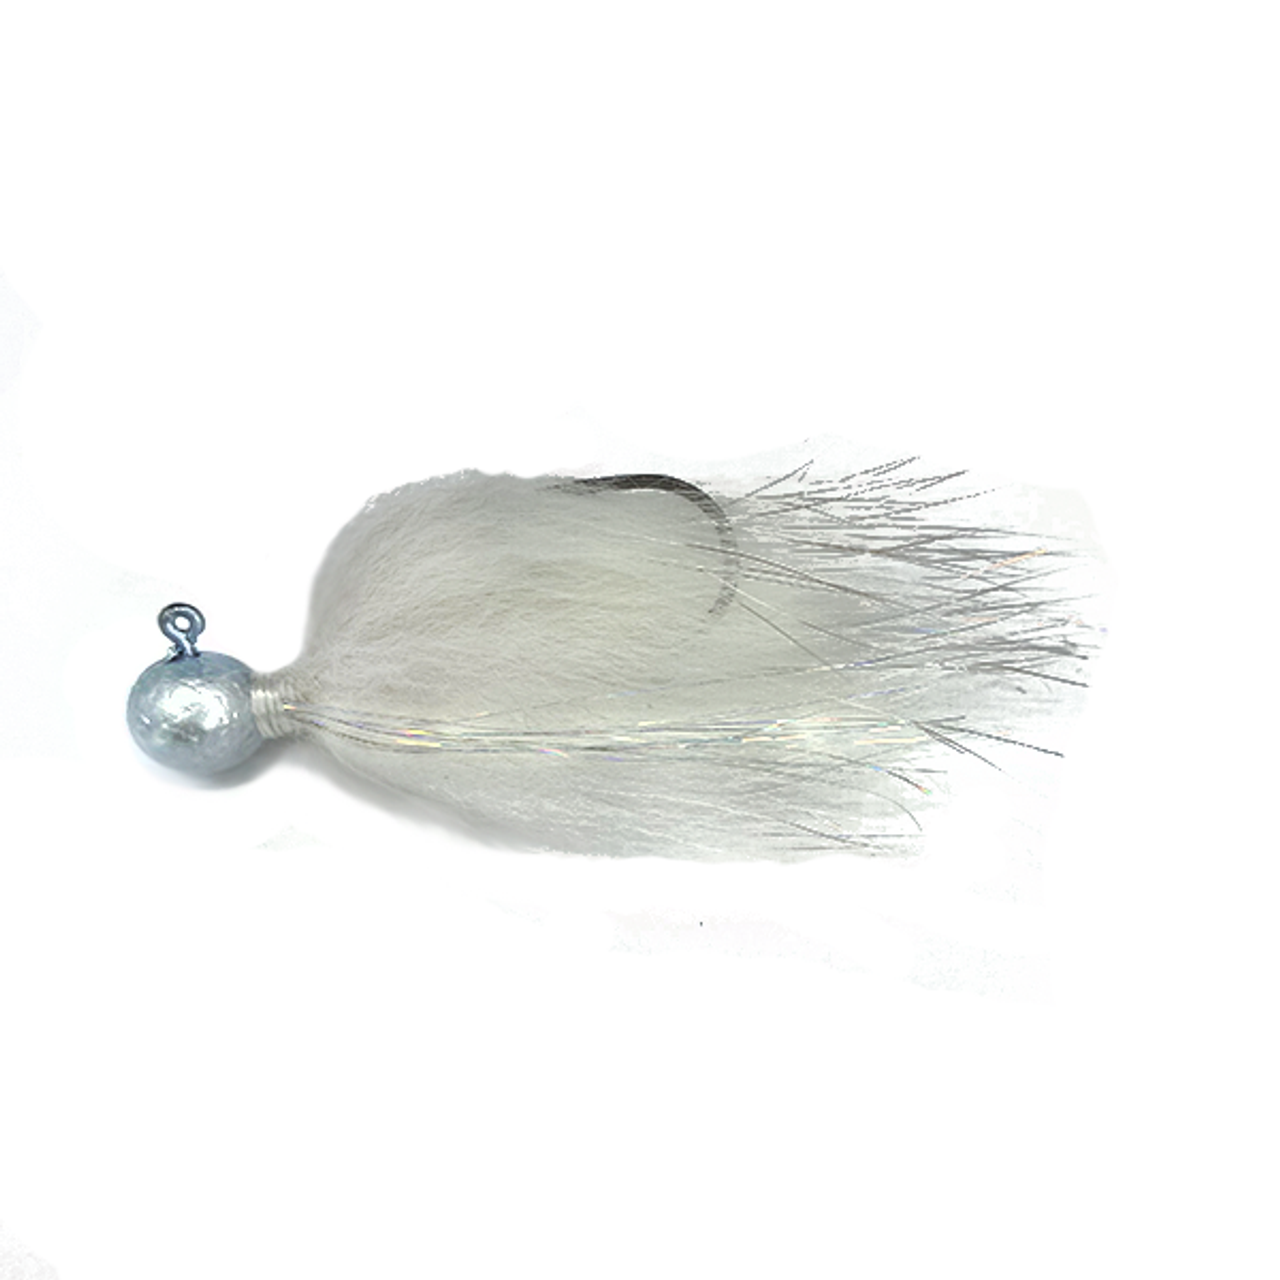 White Hair Jig - Bass Fishing Hair jig for smallmouth bass, walleye, and  many other game fish